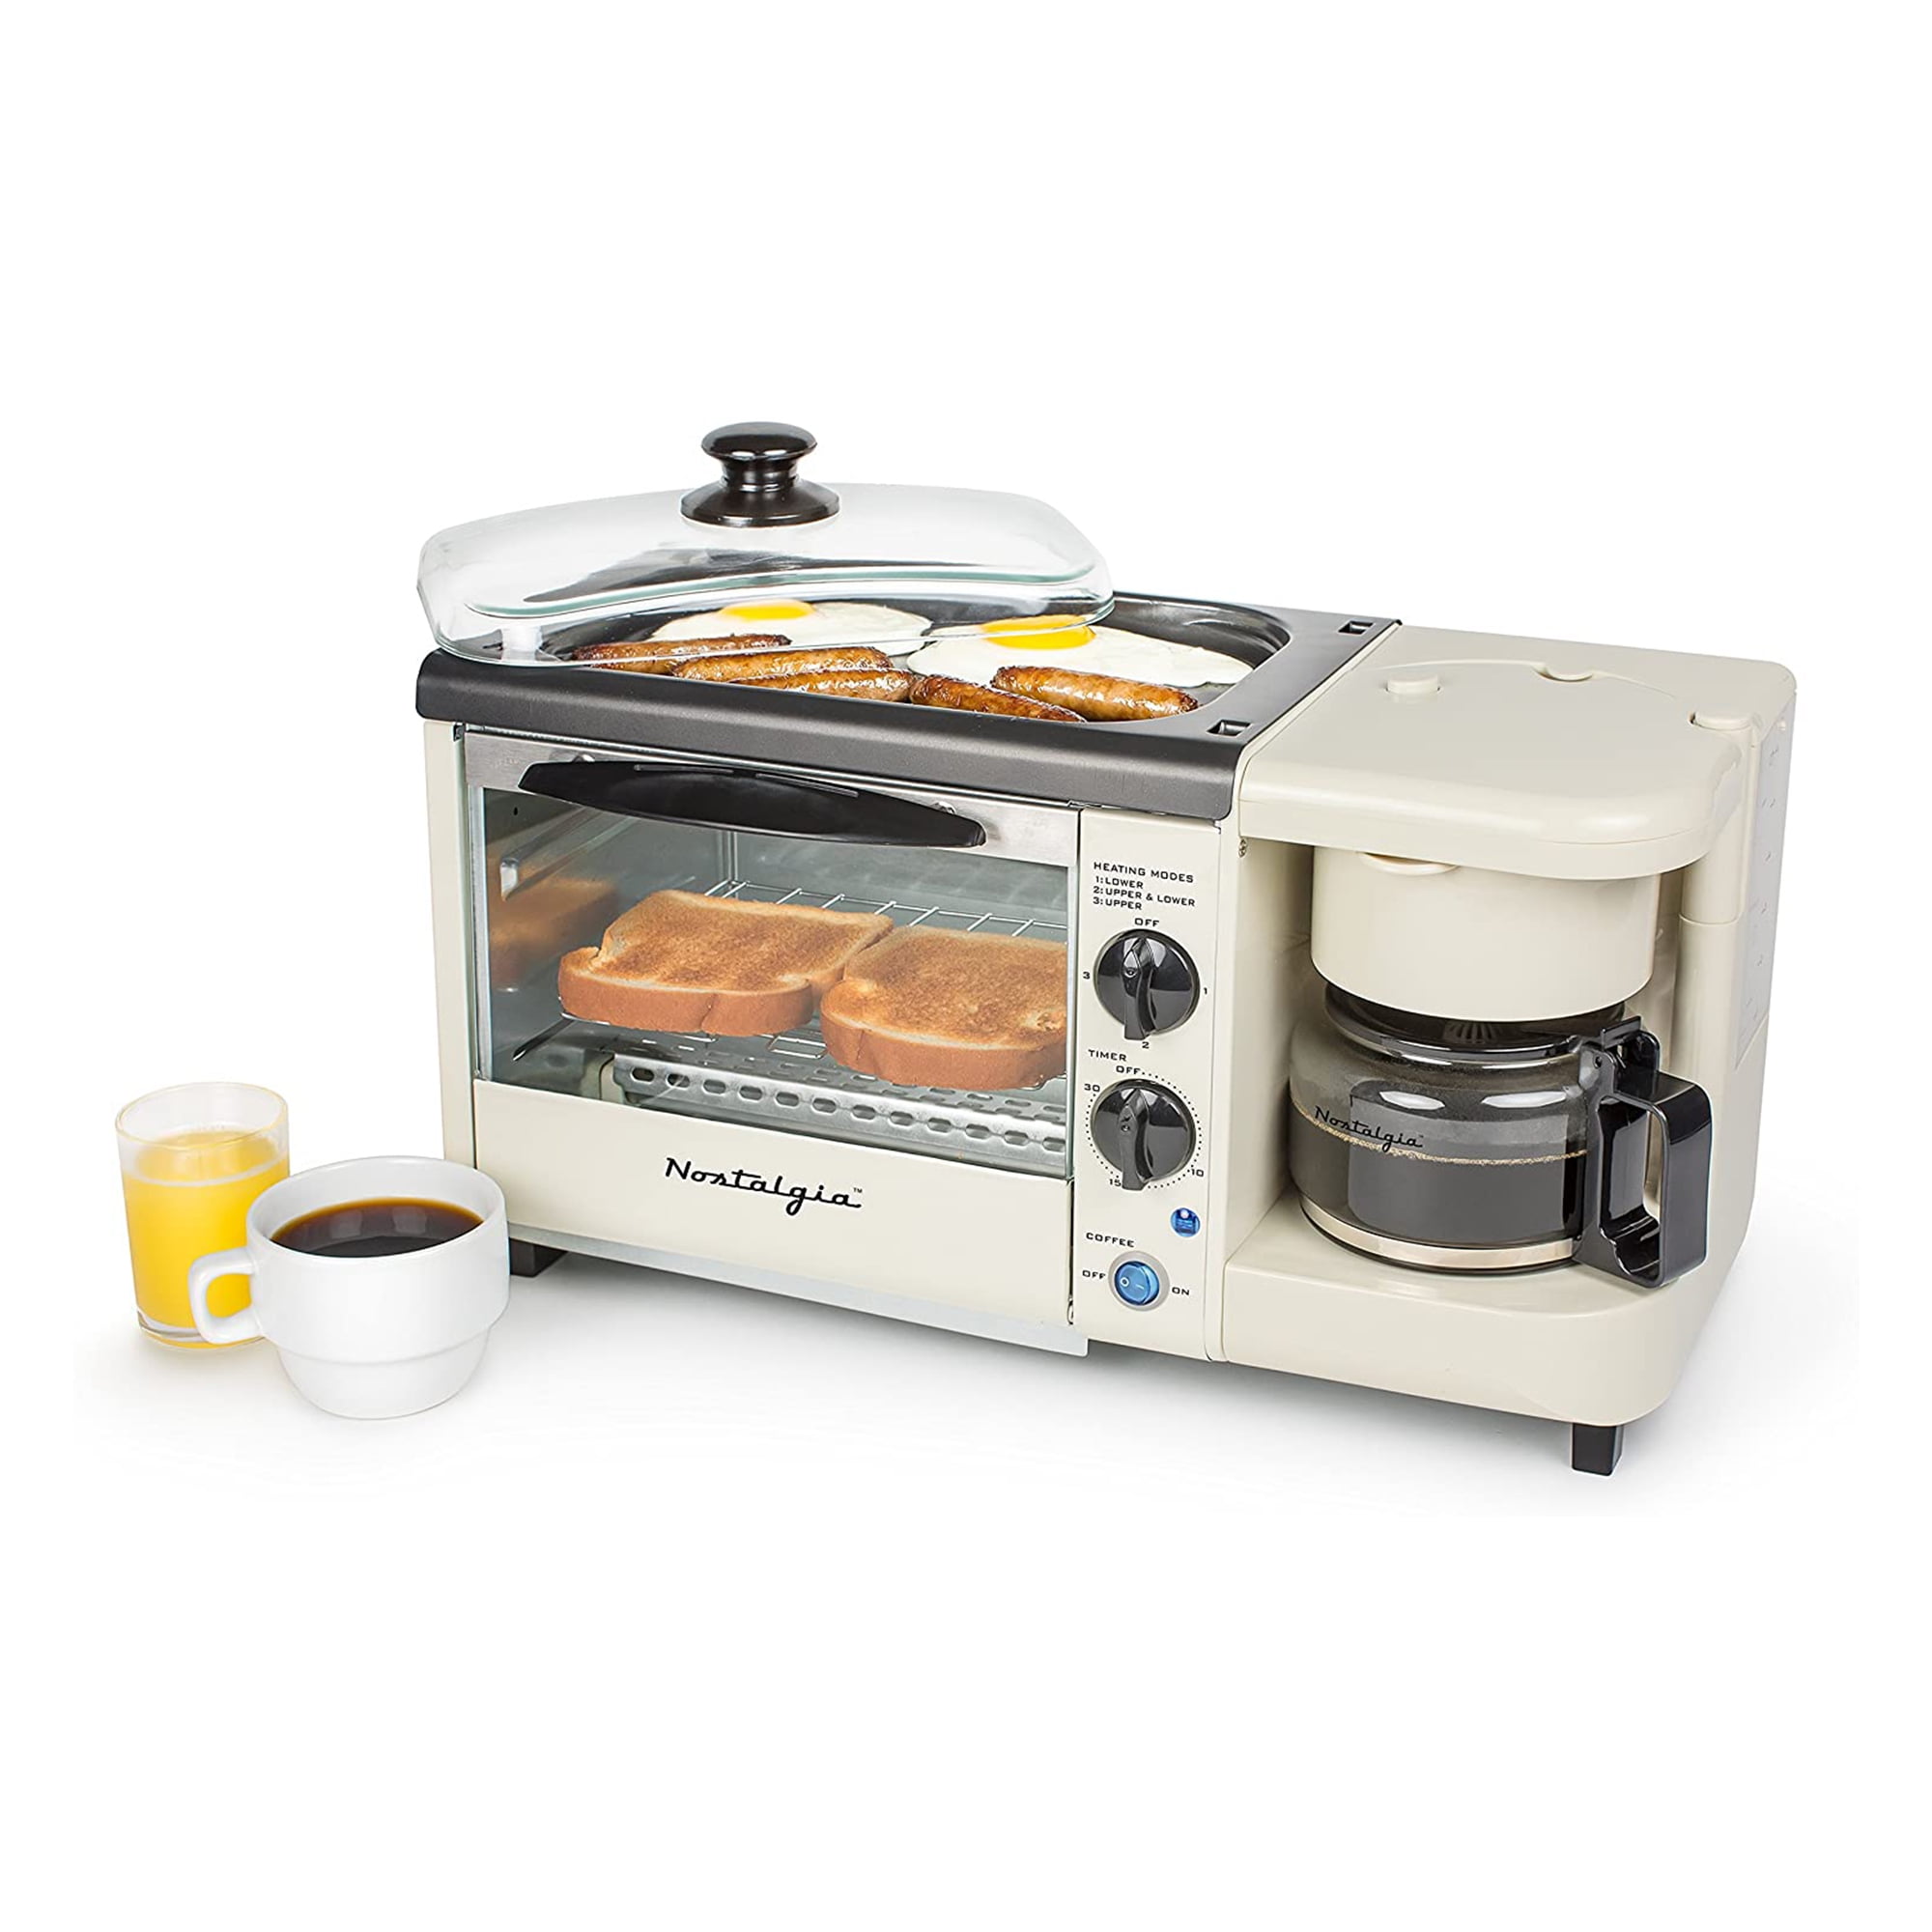 SPT Breakfast Center 1450 W 2-Slice White and Stainless Steel Toaster Oven  with Griddle and Coffee Maker BM-1120W - The Home Depot